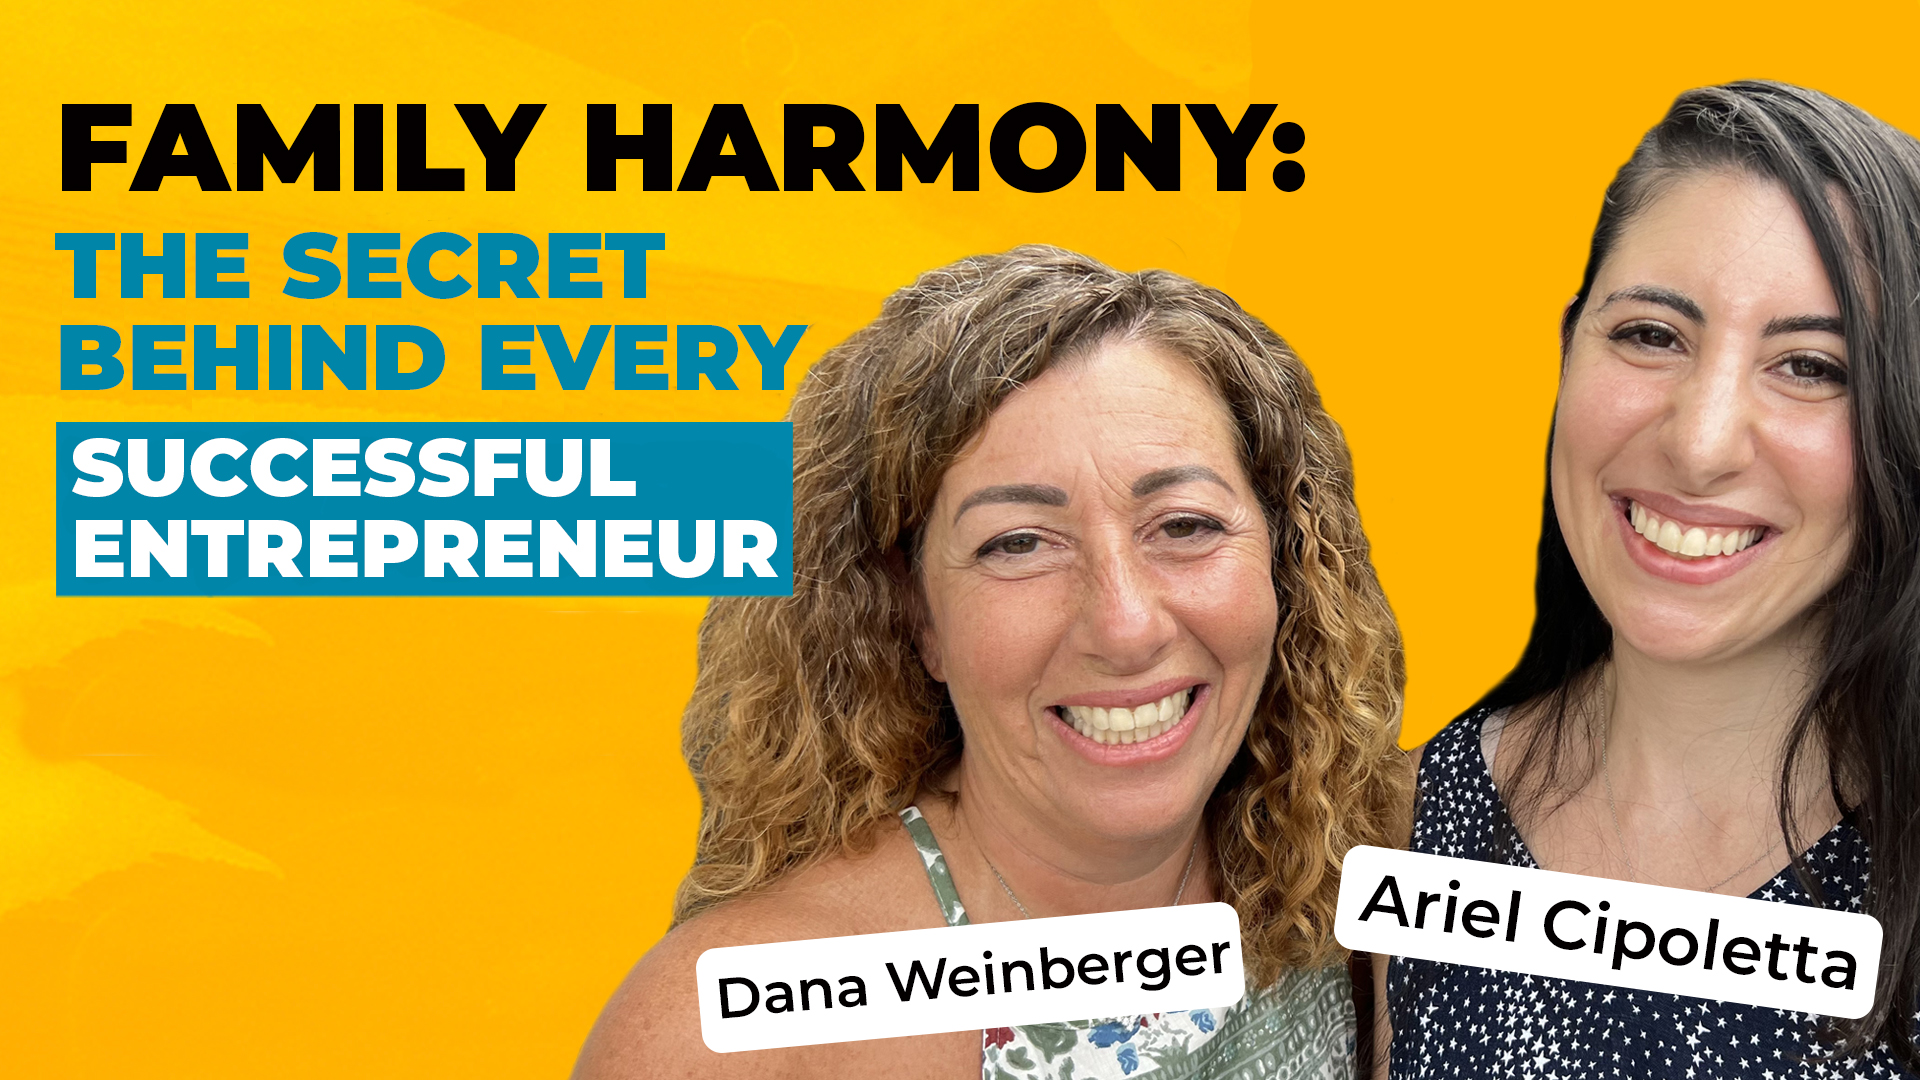 A headshot of Dana Weinberger and Ariel Cipoletta on a bold yellow background with the title of the episode "Family Harmony - The Secret Behind Every Successful Entrepreneur"